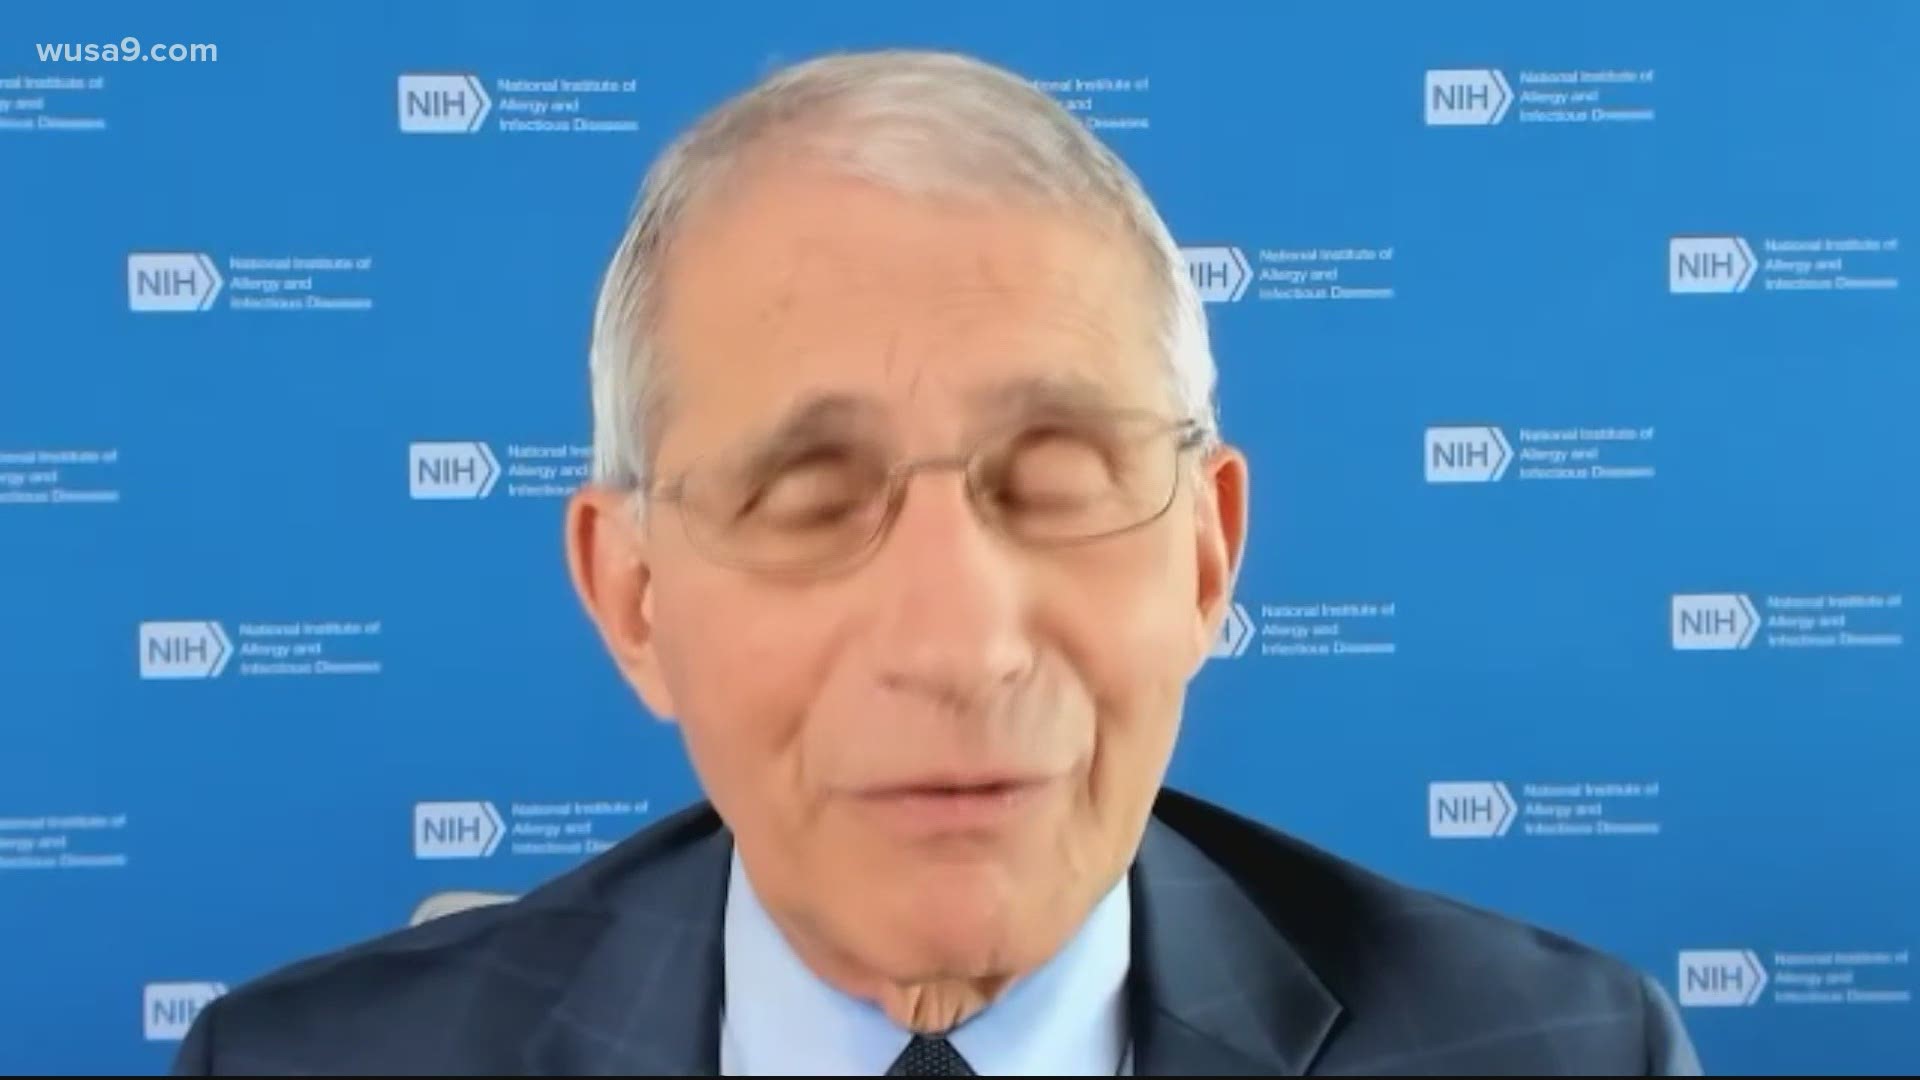 Dr. Anthony Fauci, the head of the National Institute of Allergy and Infectious Diseases, said he remains "concerned" that Americans might not get vaccinated.